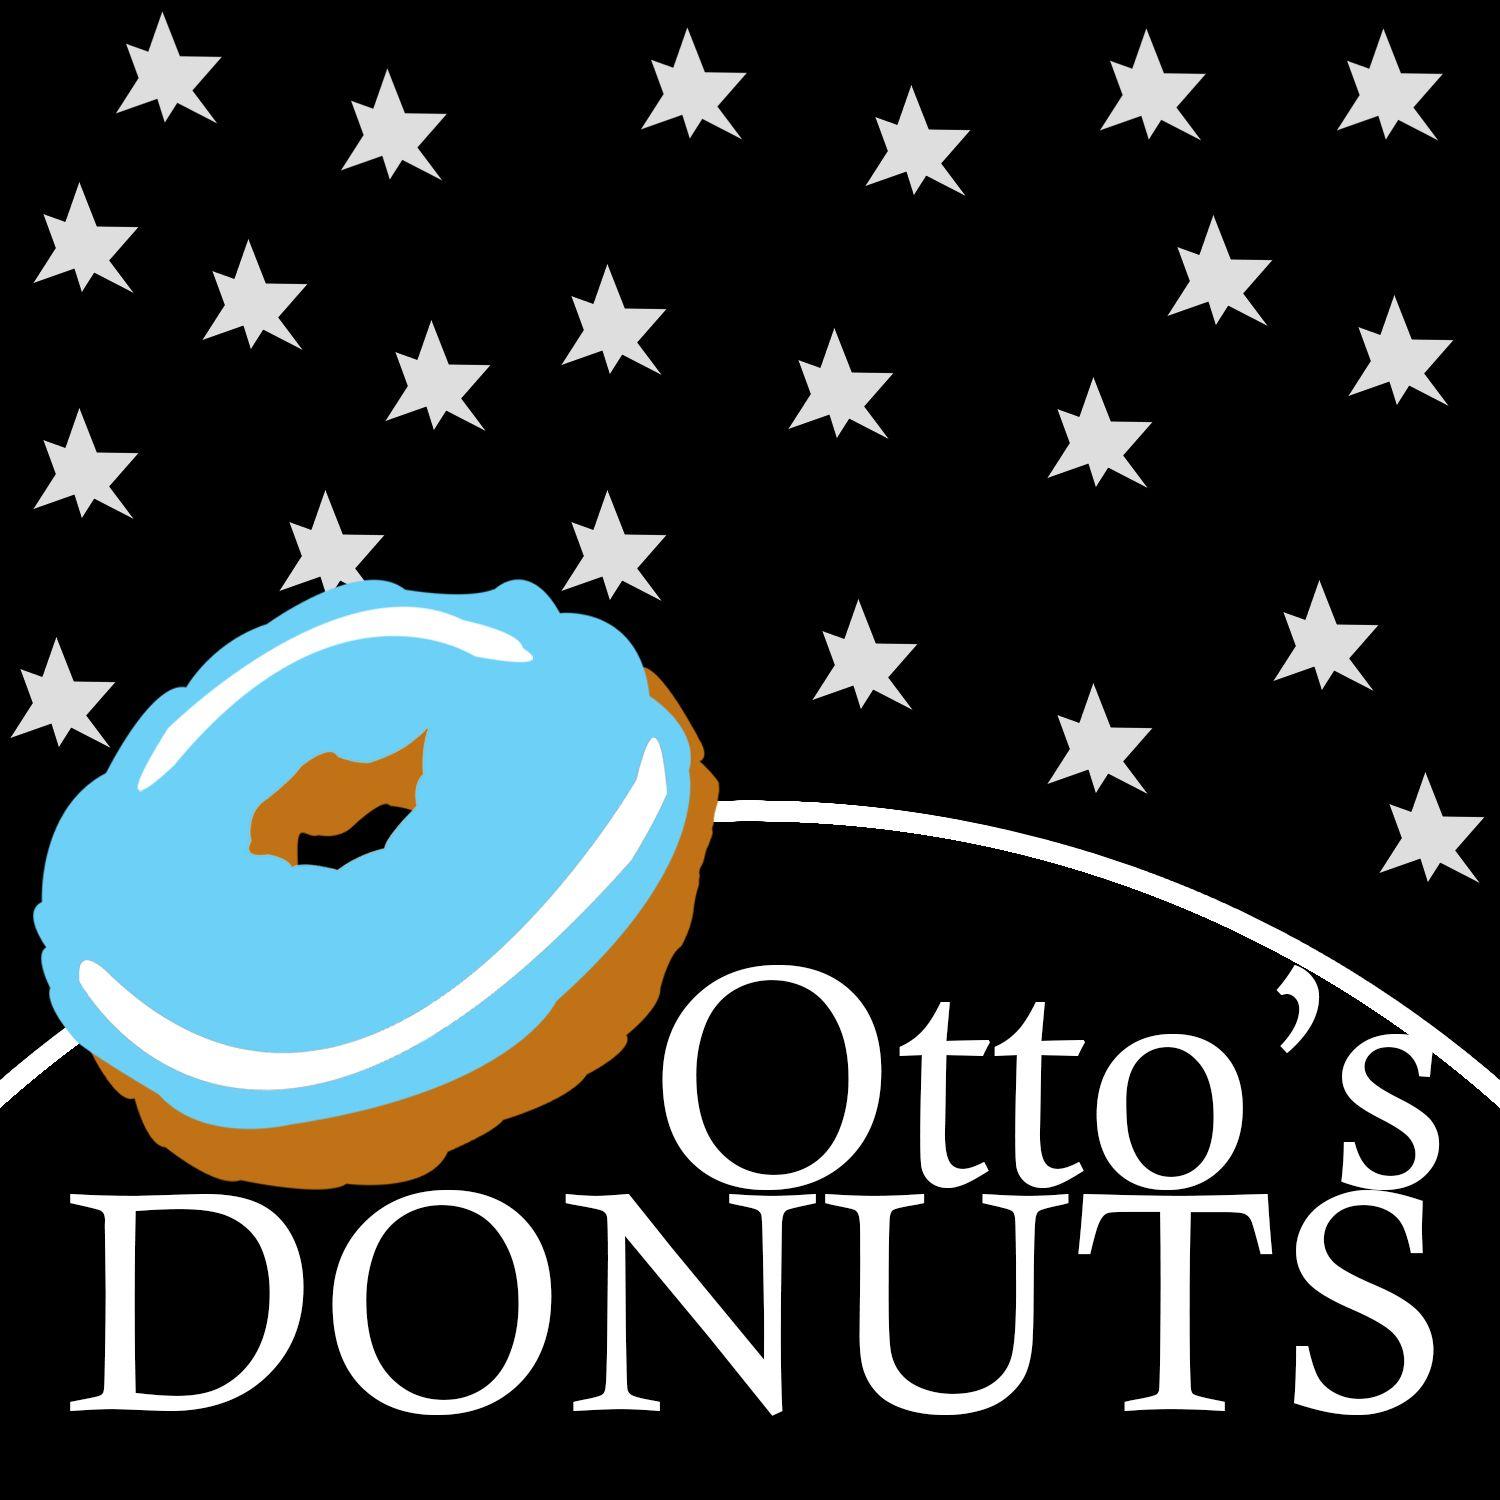 DG Star Logo - Business Logo Design for Otto's Donuts by D.G.Thompson | Design #1953570